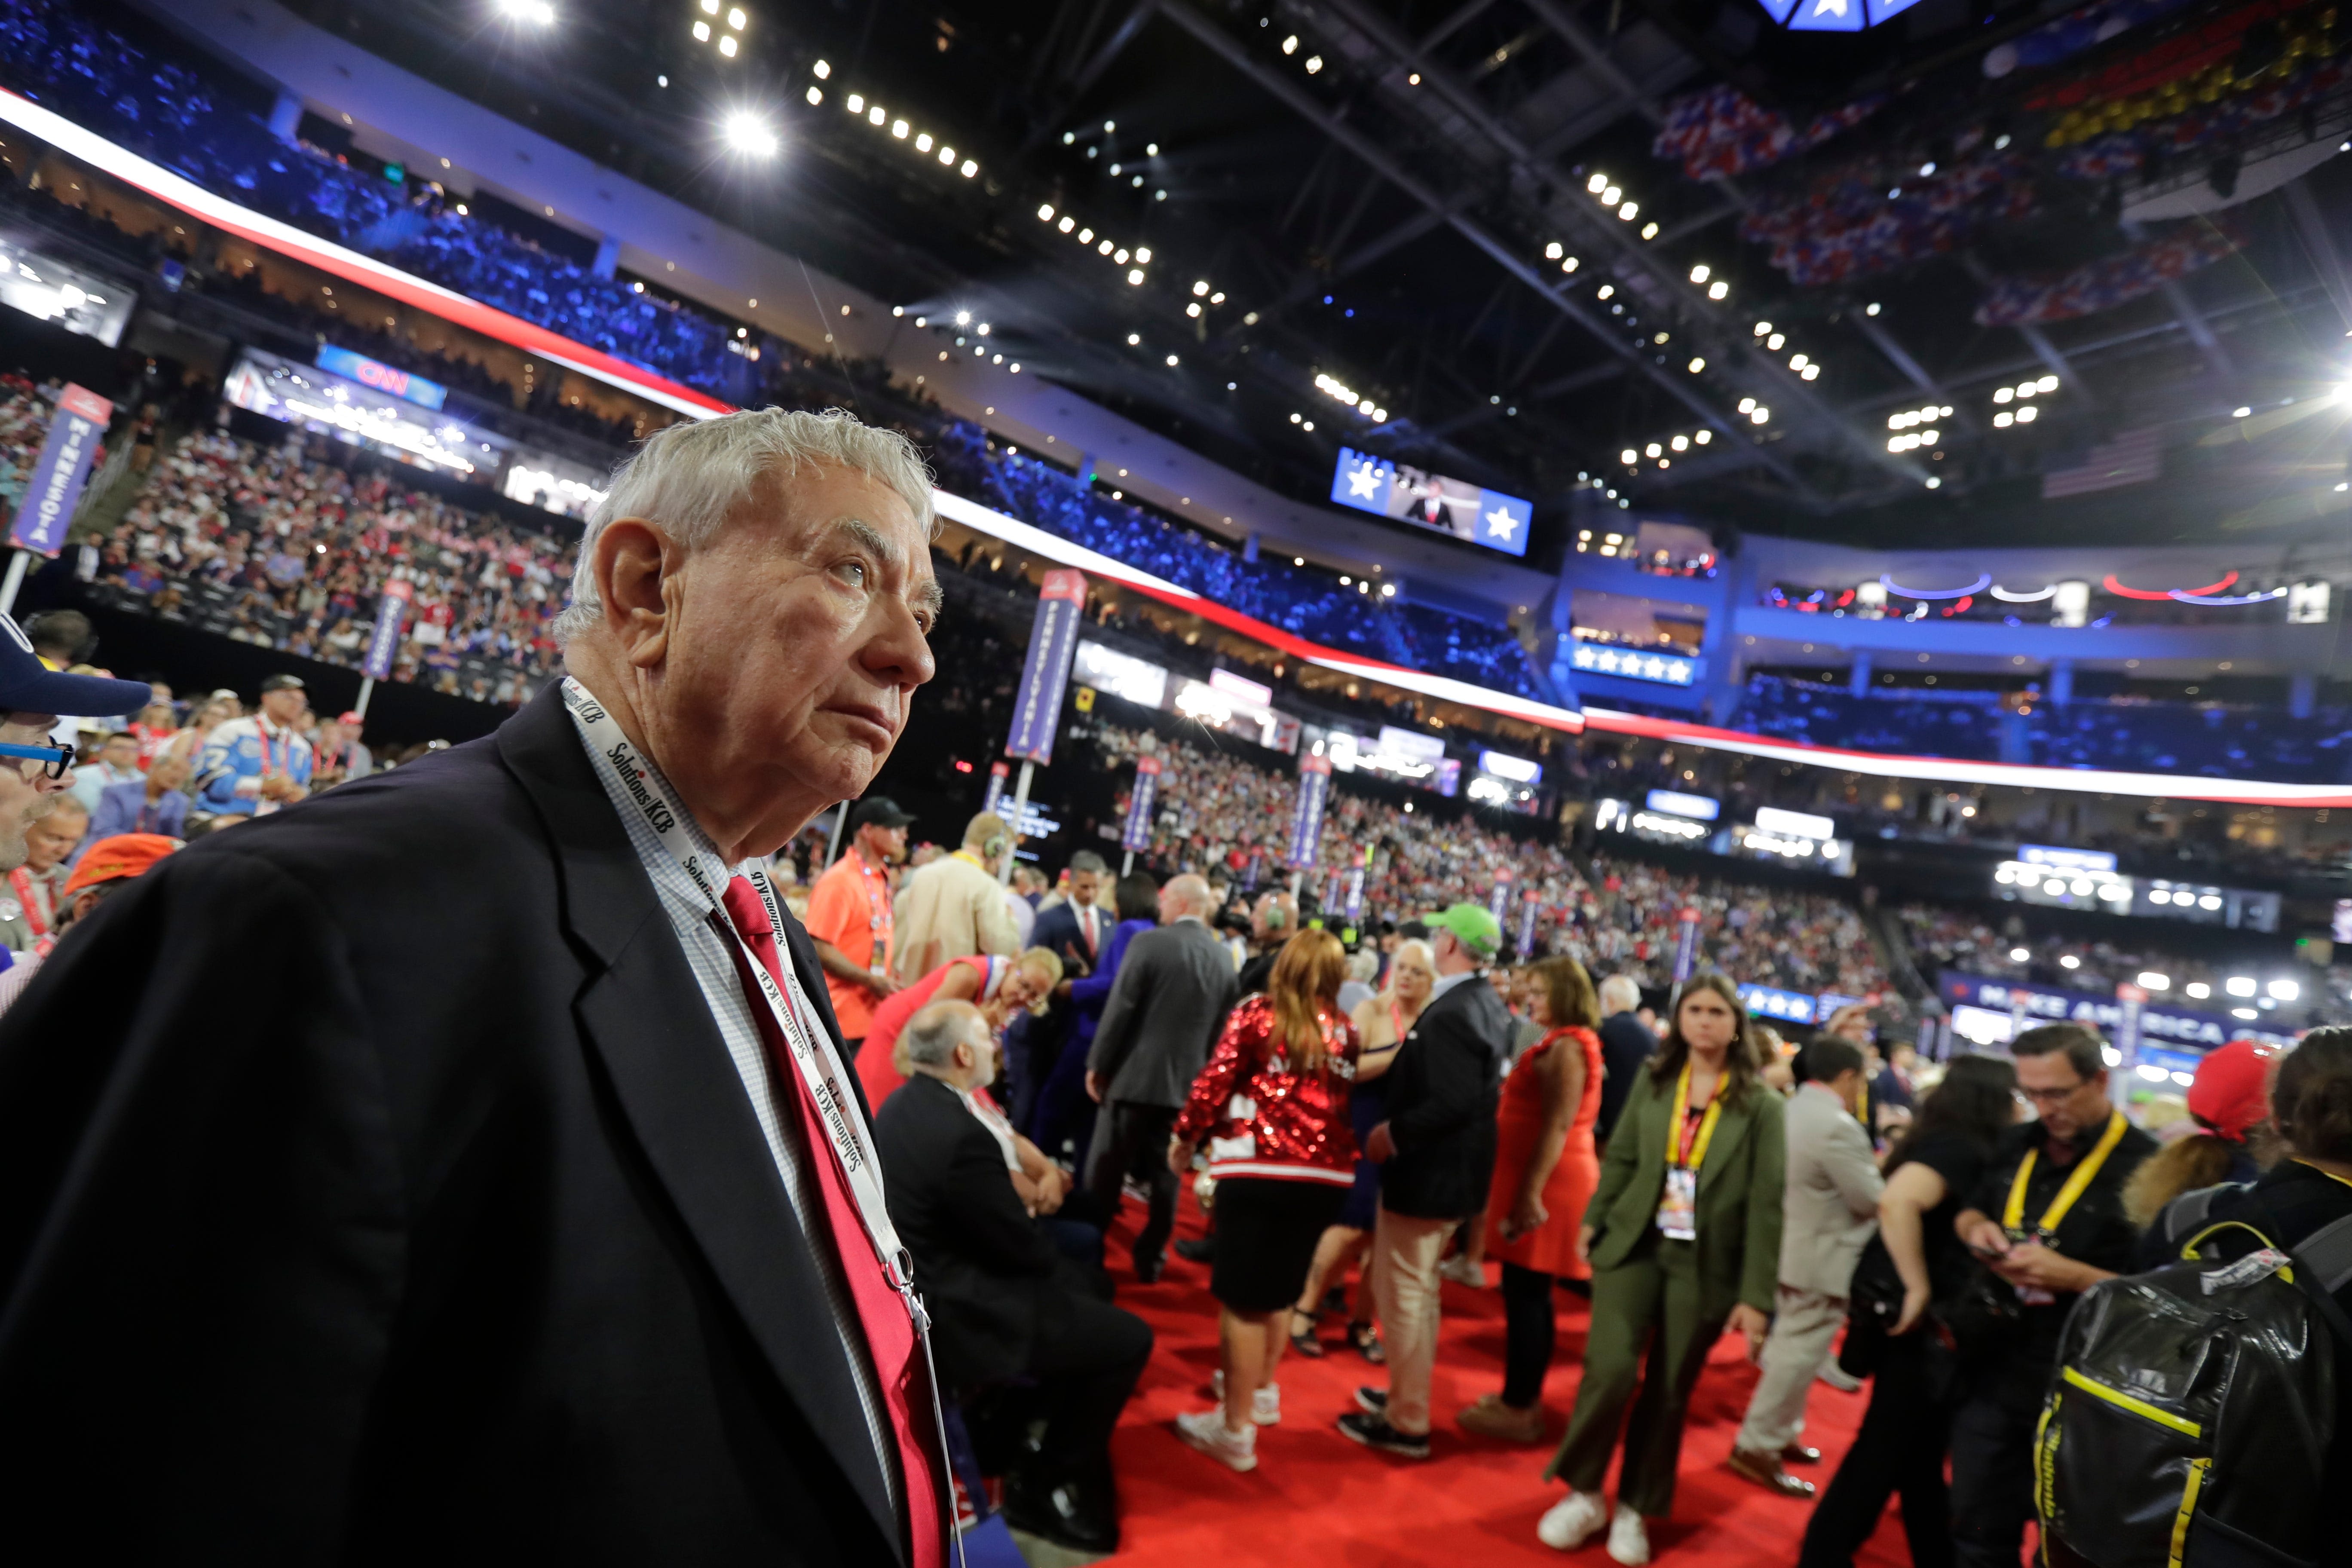 Former Wisconsin Gov. Tommy Thompson gets honor of making motion to adjourn RNC